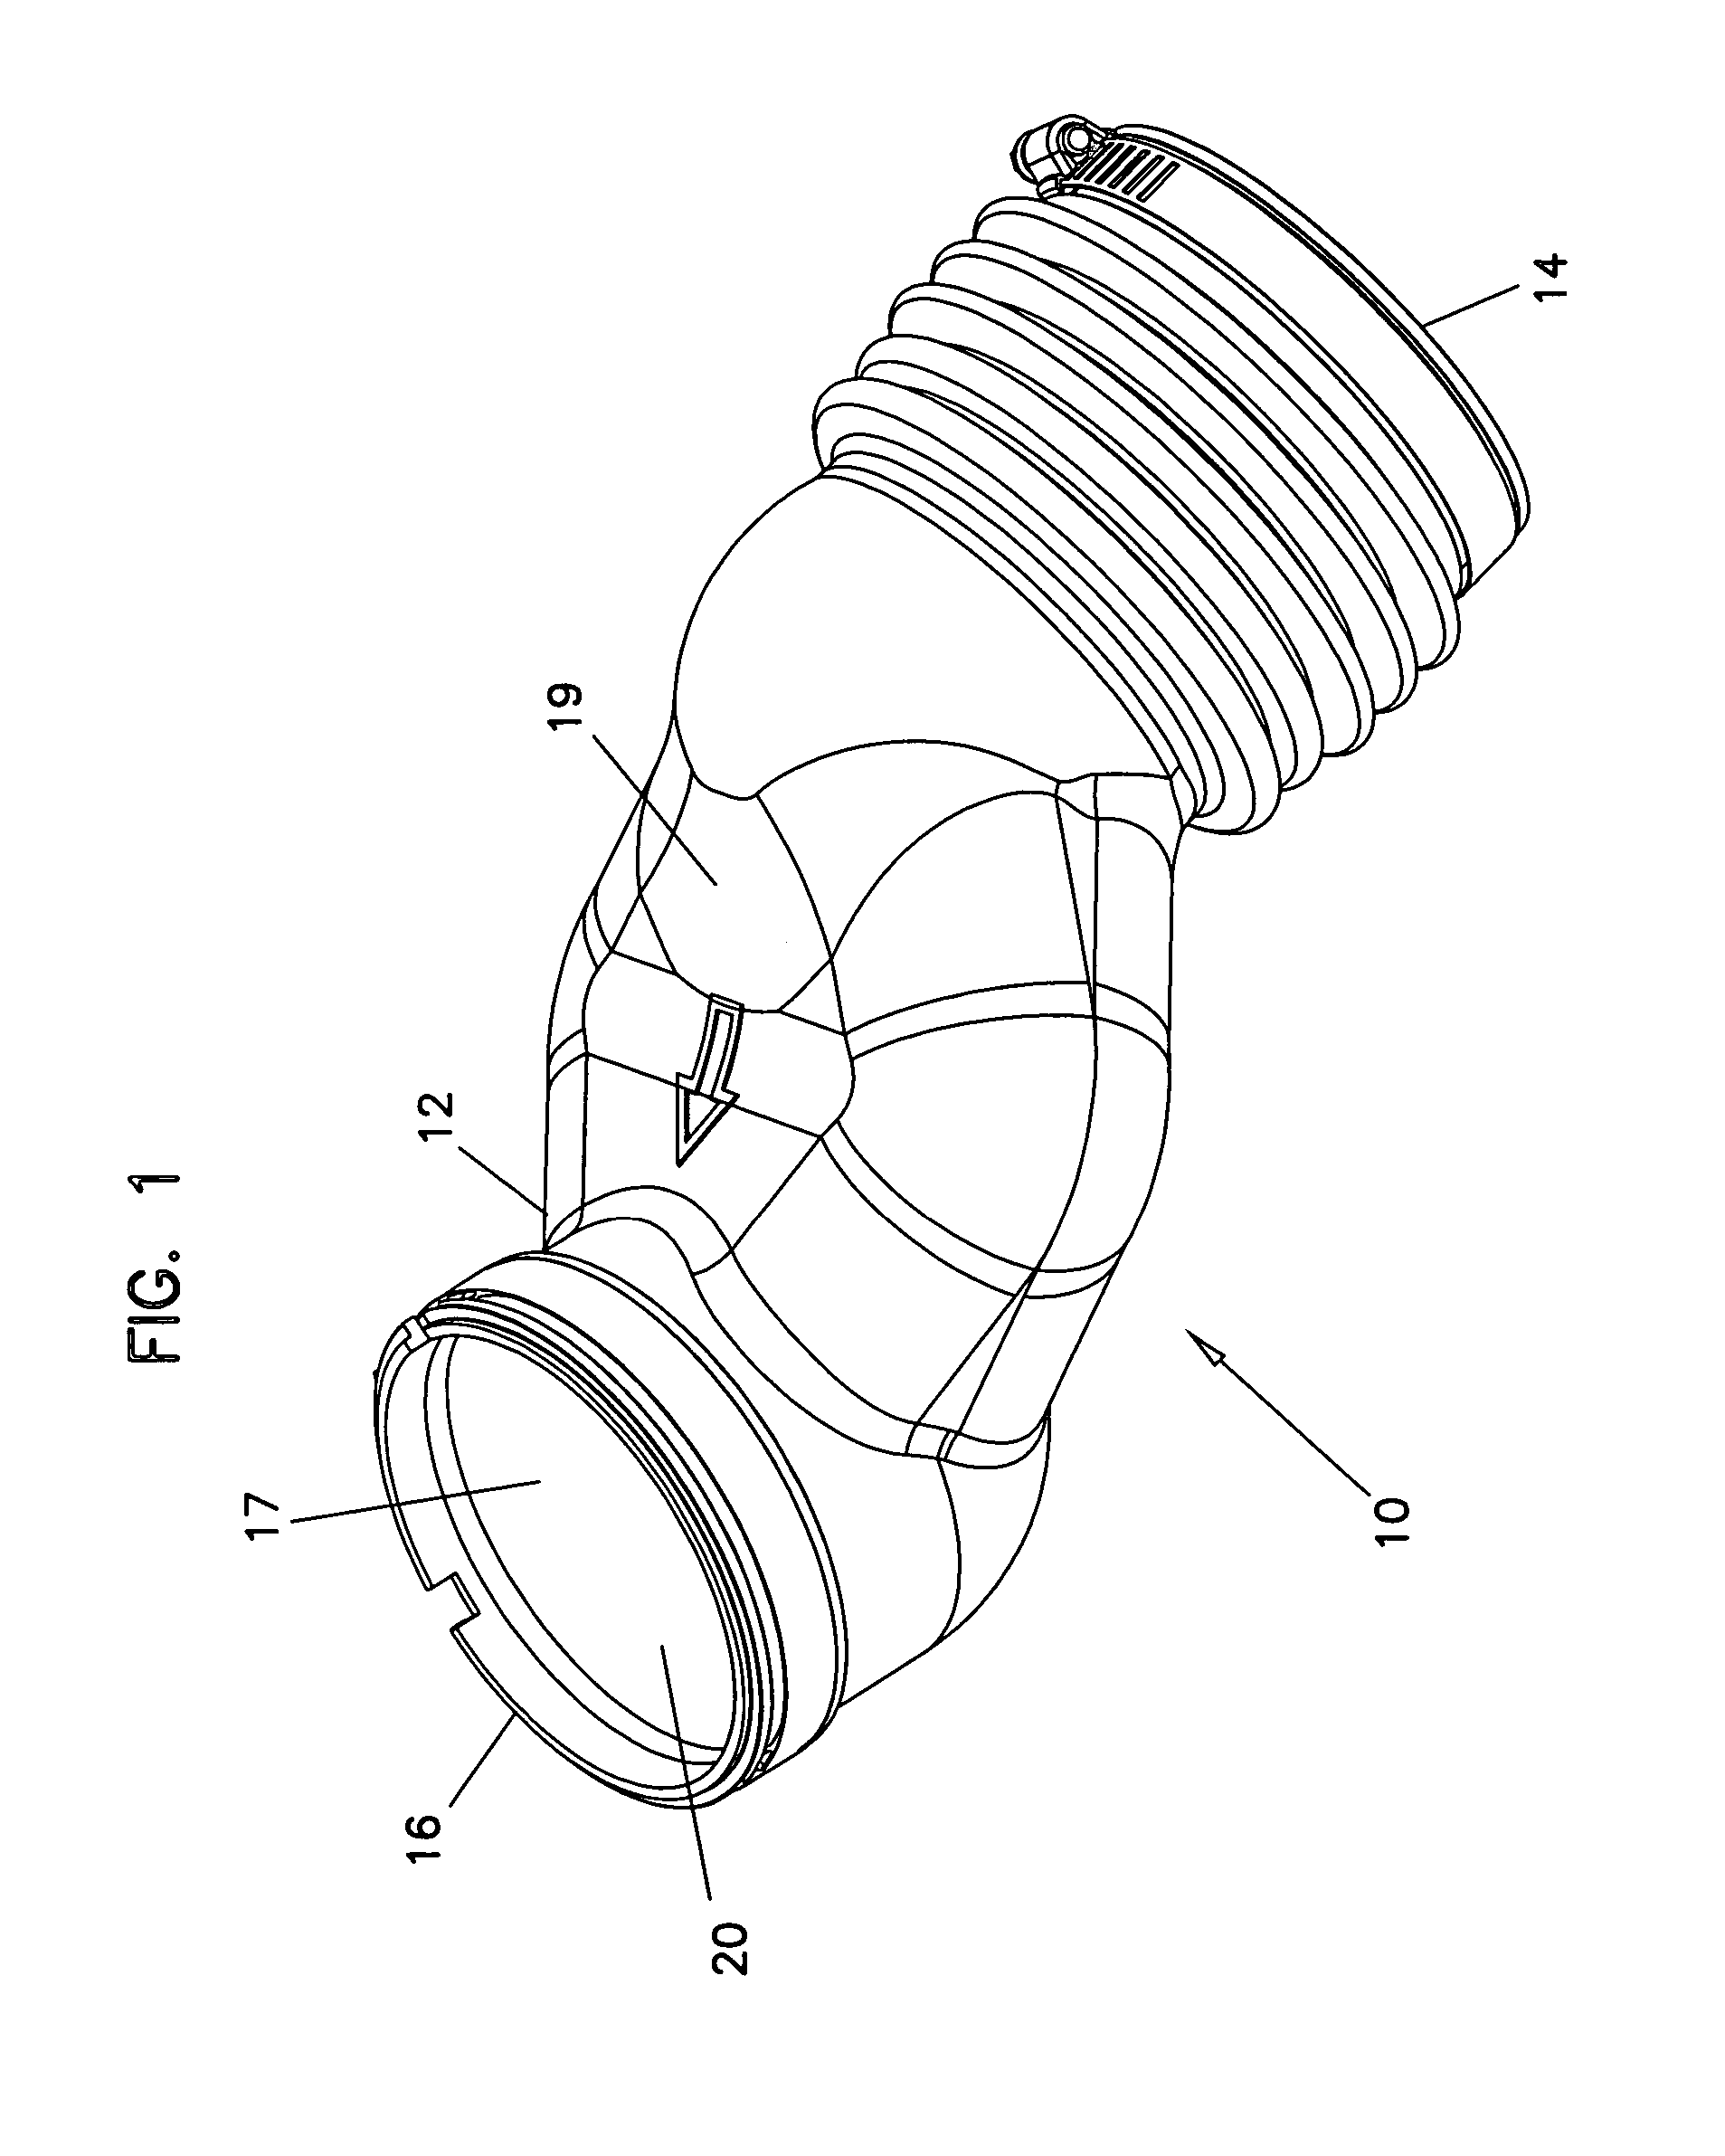 Adsorptive duct for contaminant removal, and methods